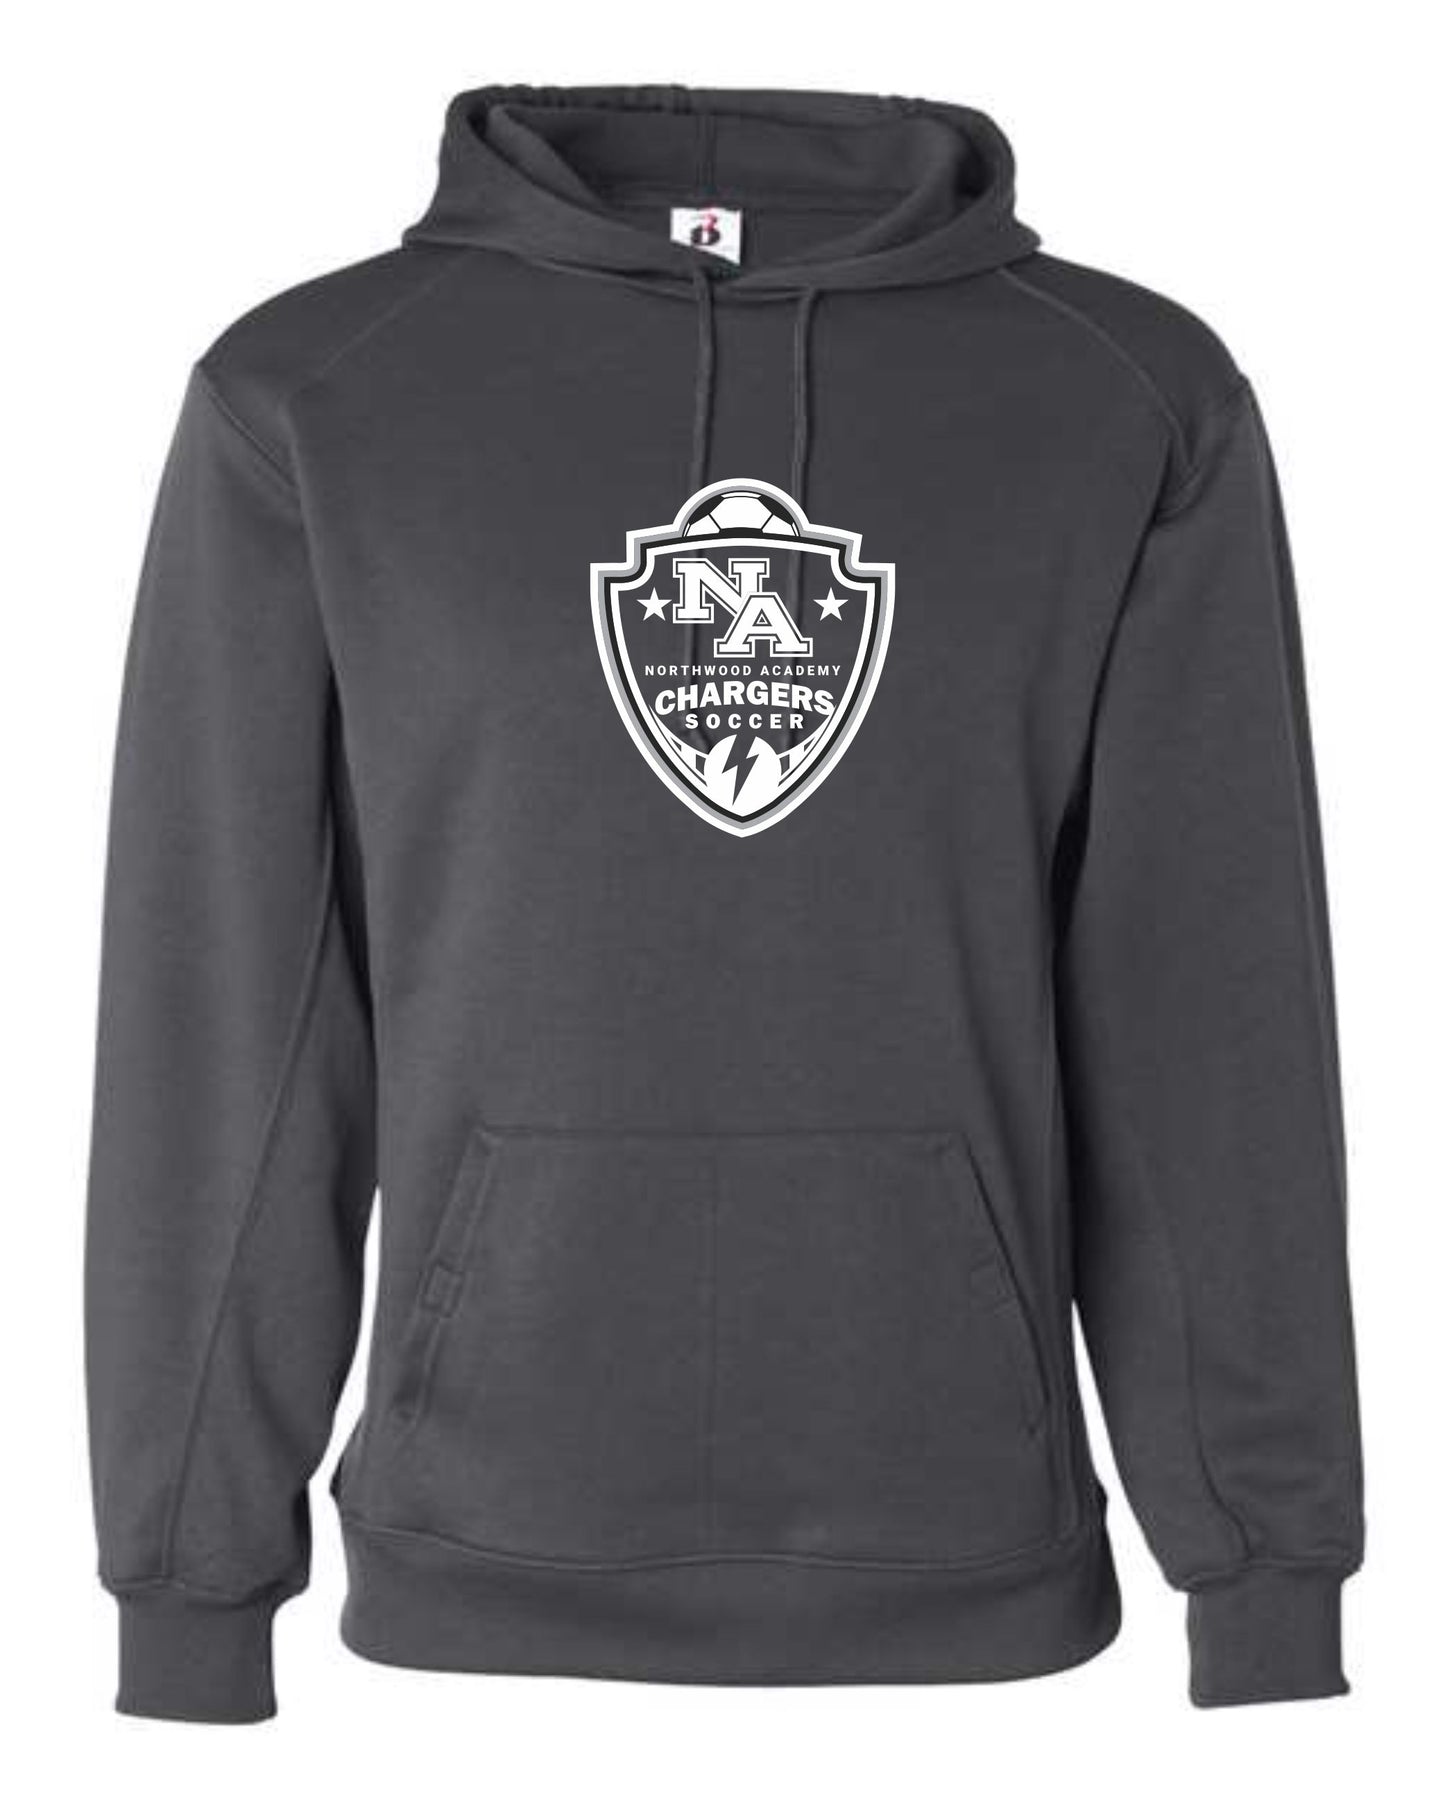 Soccer Performance Hoodie Approved School Attire (3 colors)